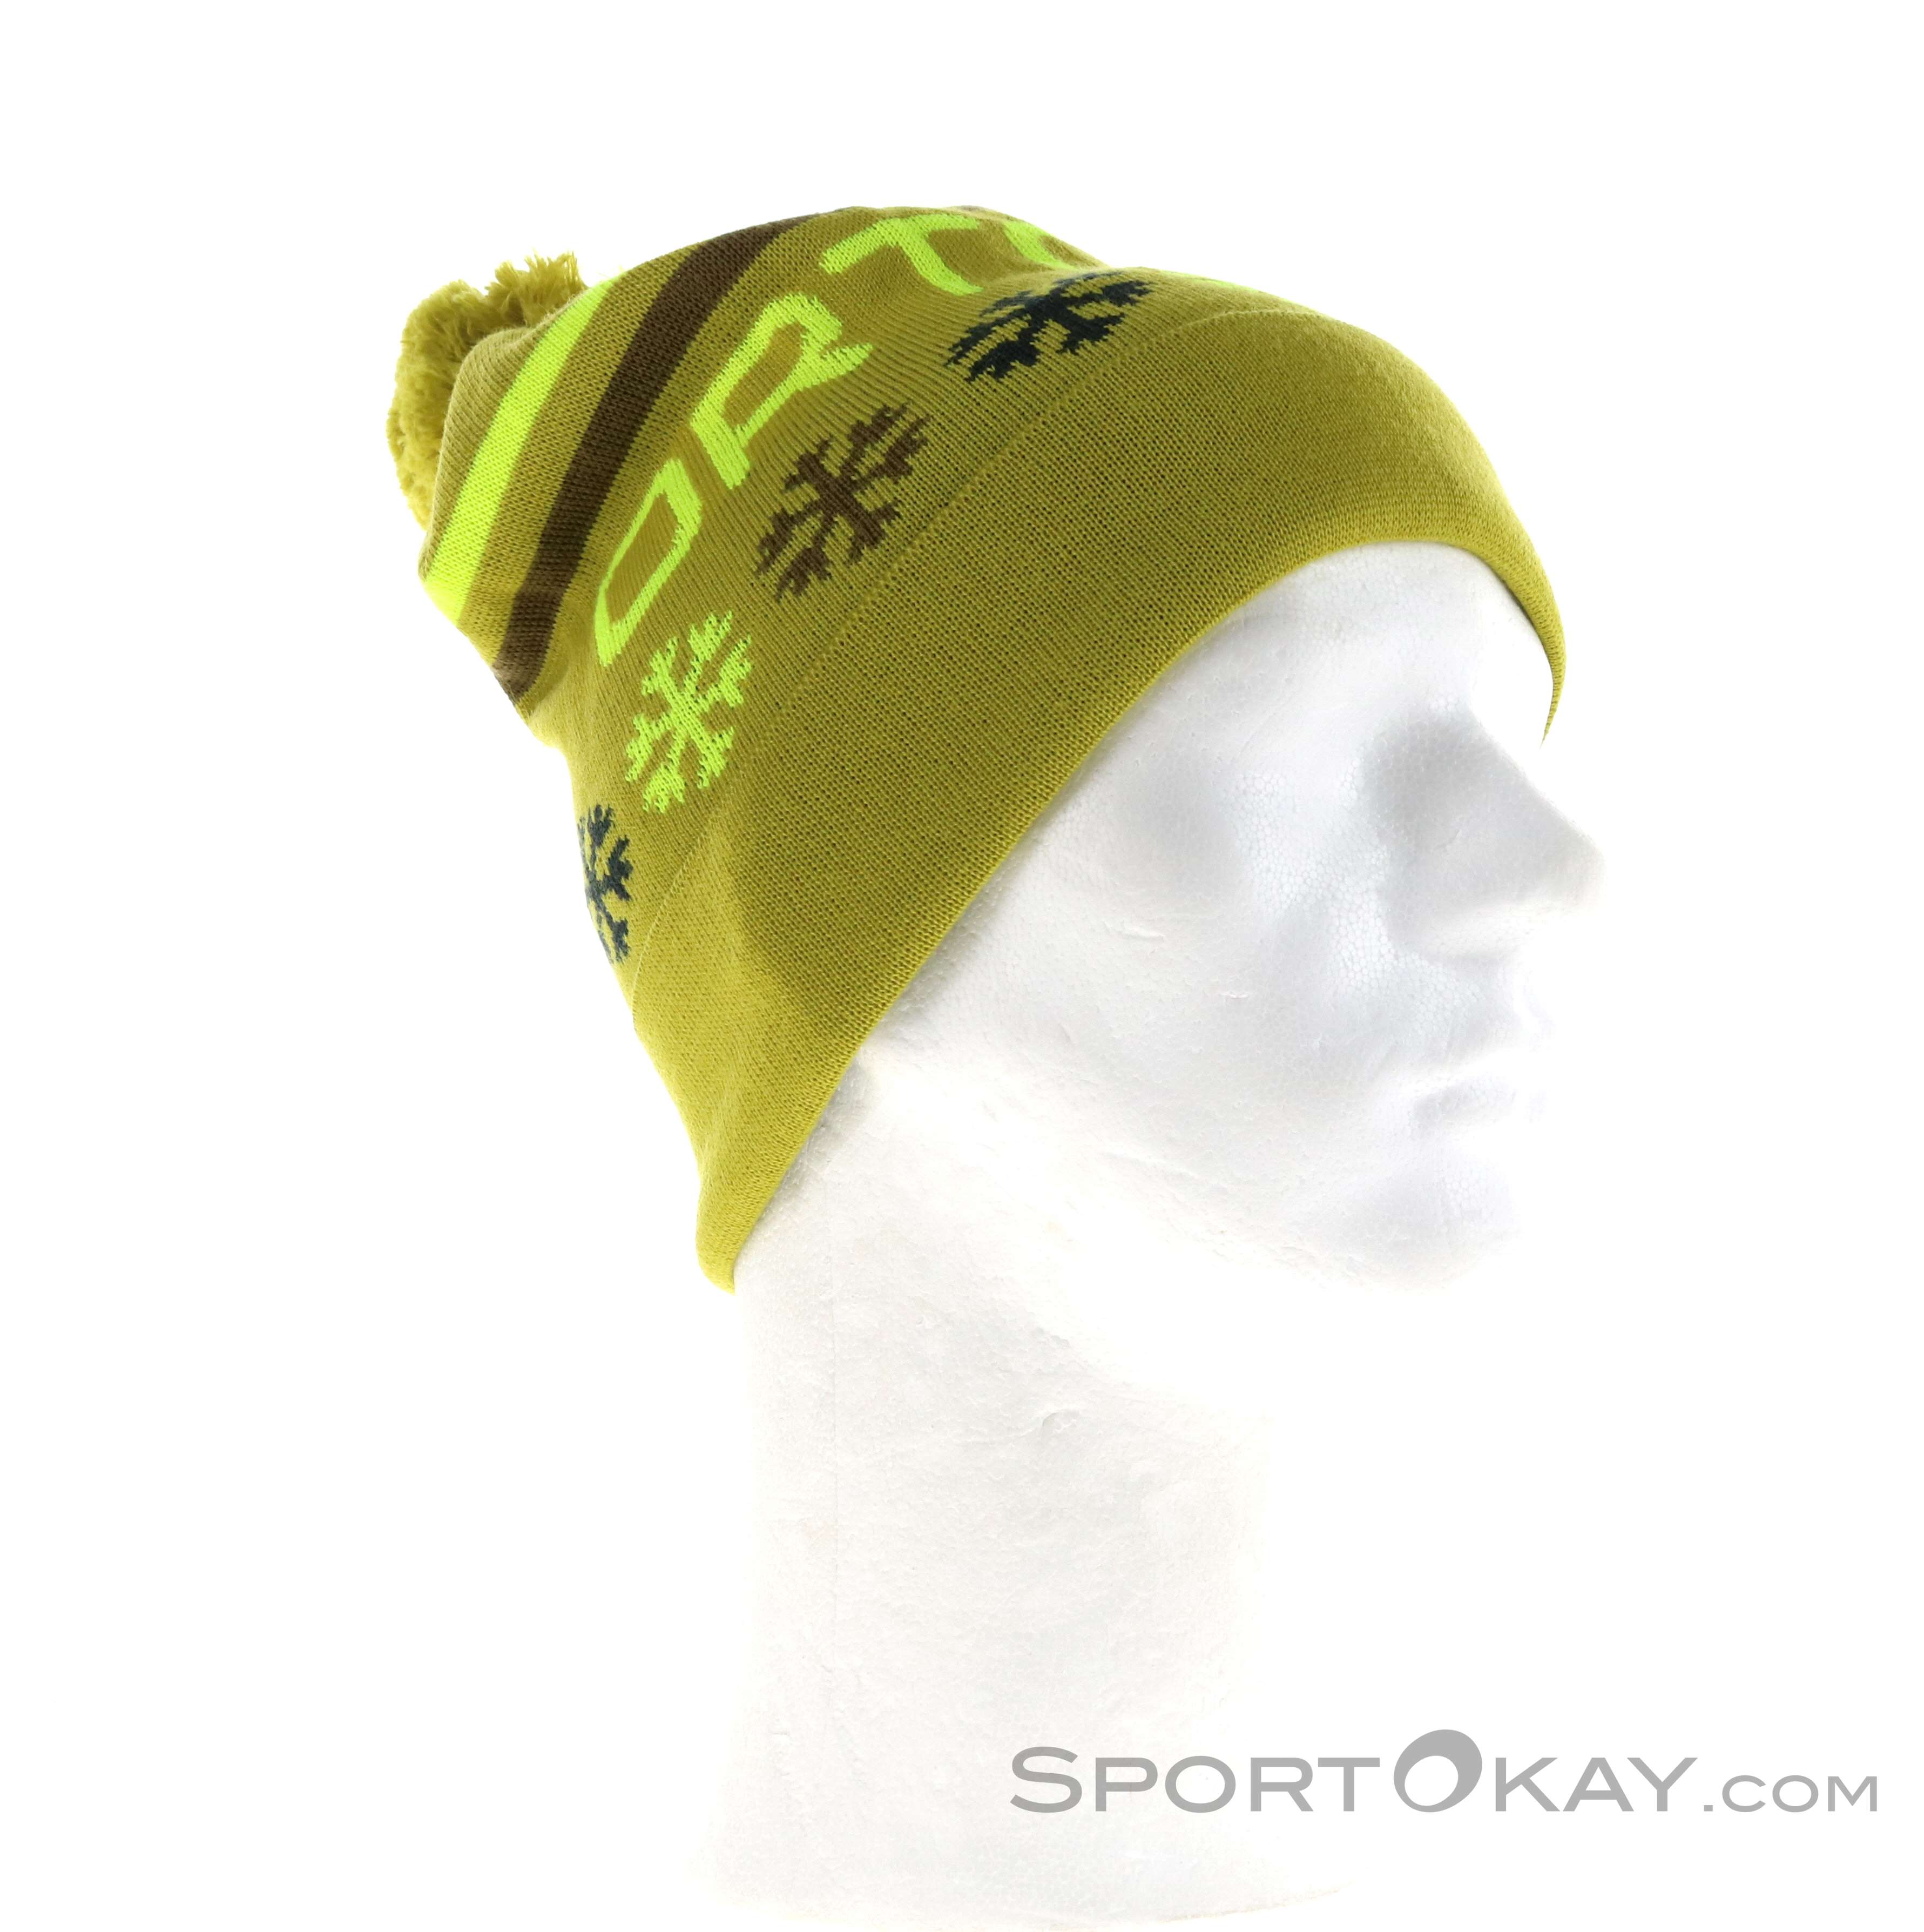 Ortovox Nordic Knit Beanie - Caps & Headbands - Outdoor Clothing